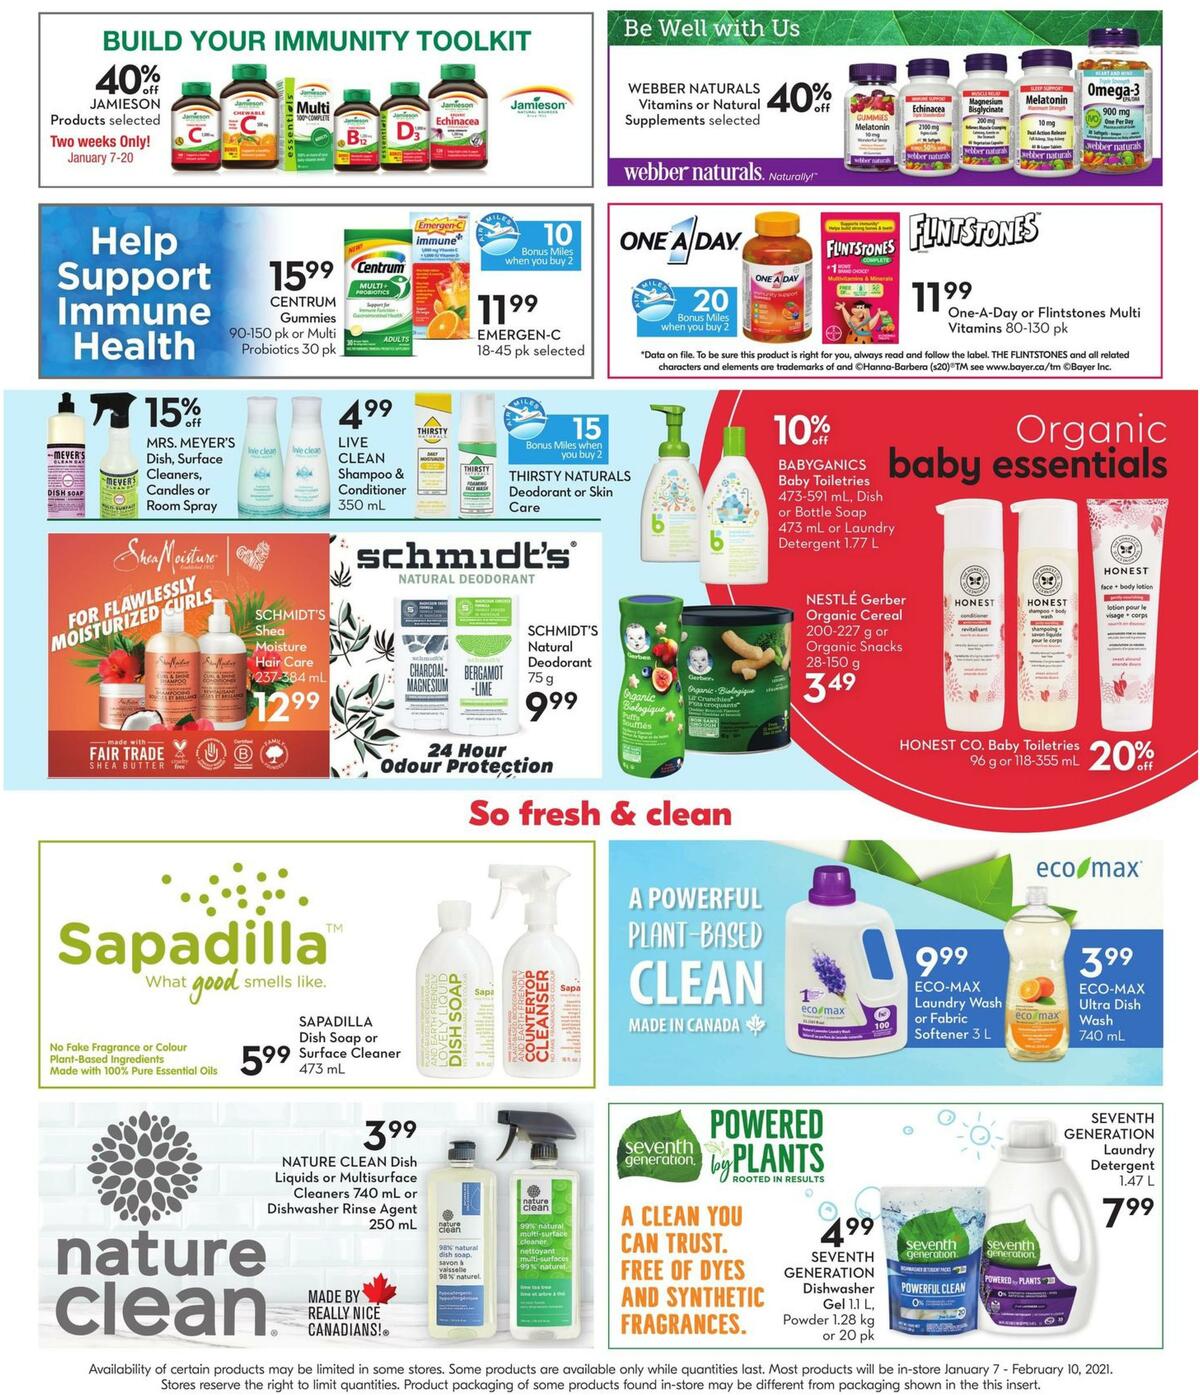 Safeway Flyer from January 7